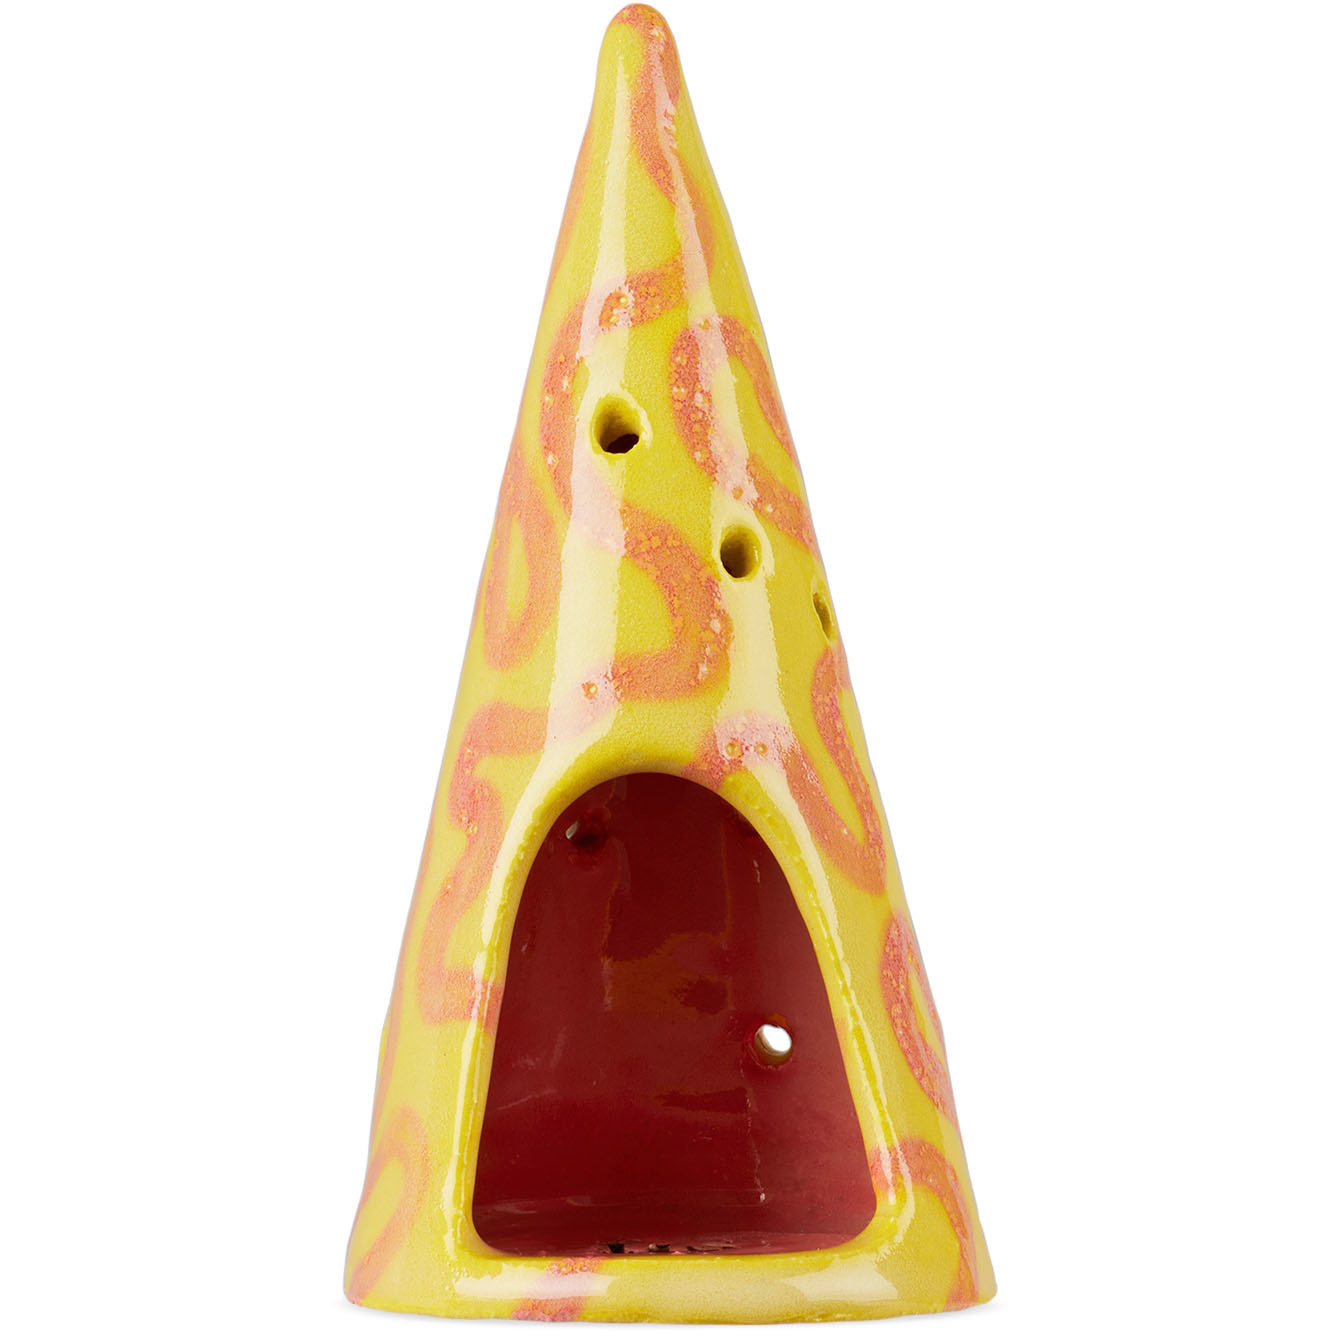 Hannah Simpson Studio SSENSE Exclusive Yellow Small Tree Tealight Candle Holder - image 1